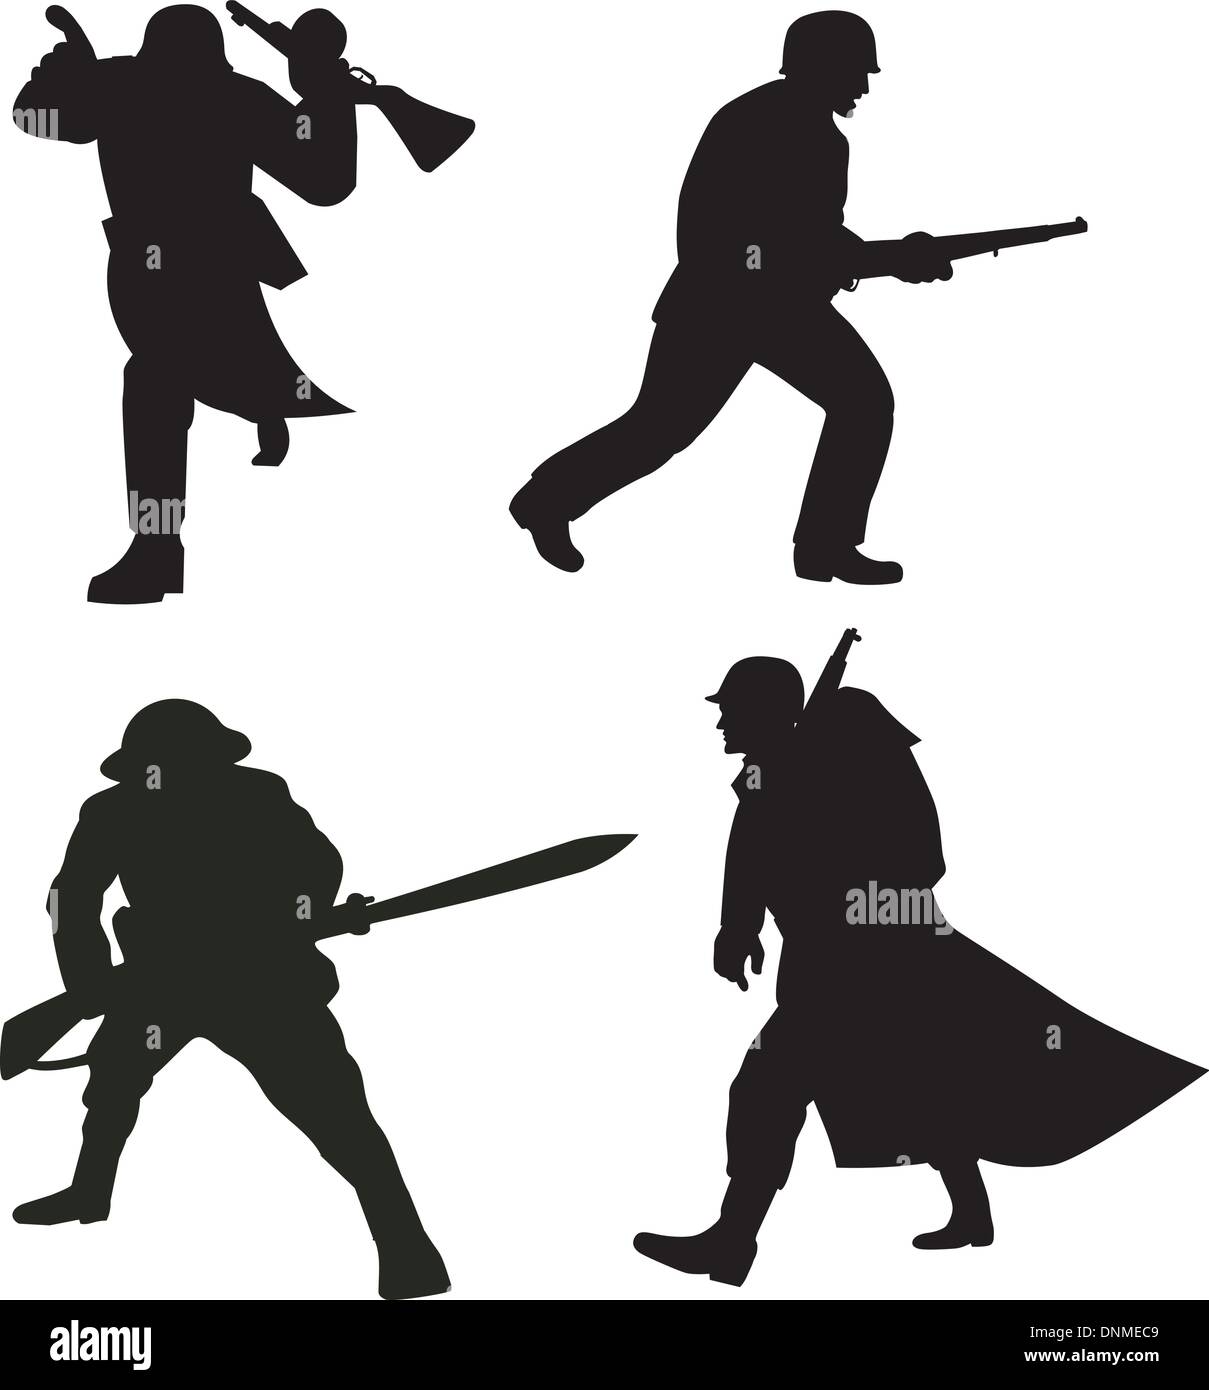 illustration of a silhouette of a soldier attacking with bayonet rifle,marching  on white background Stock Vector